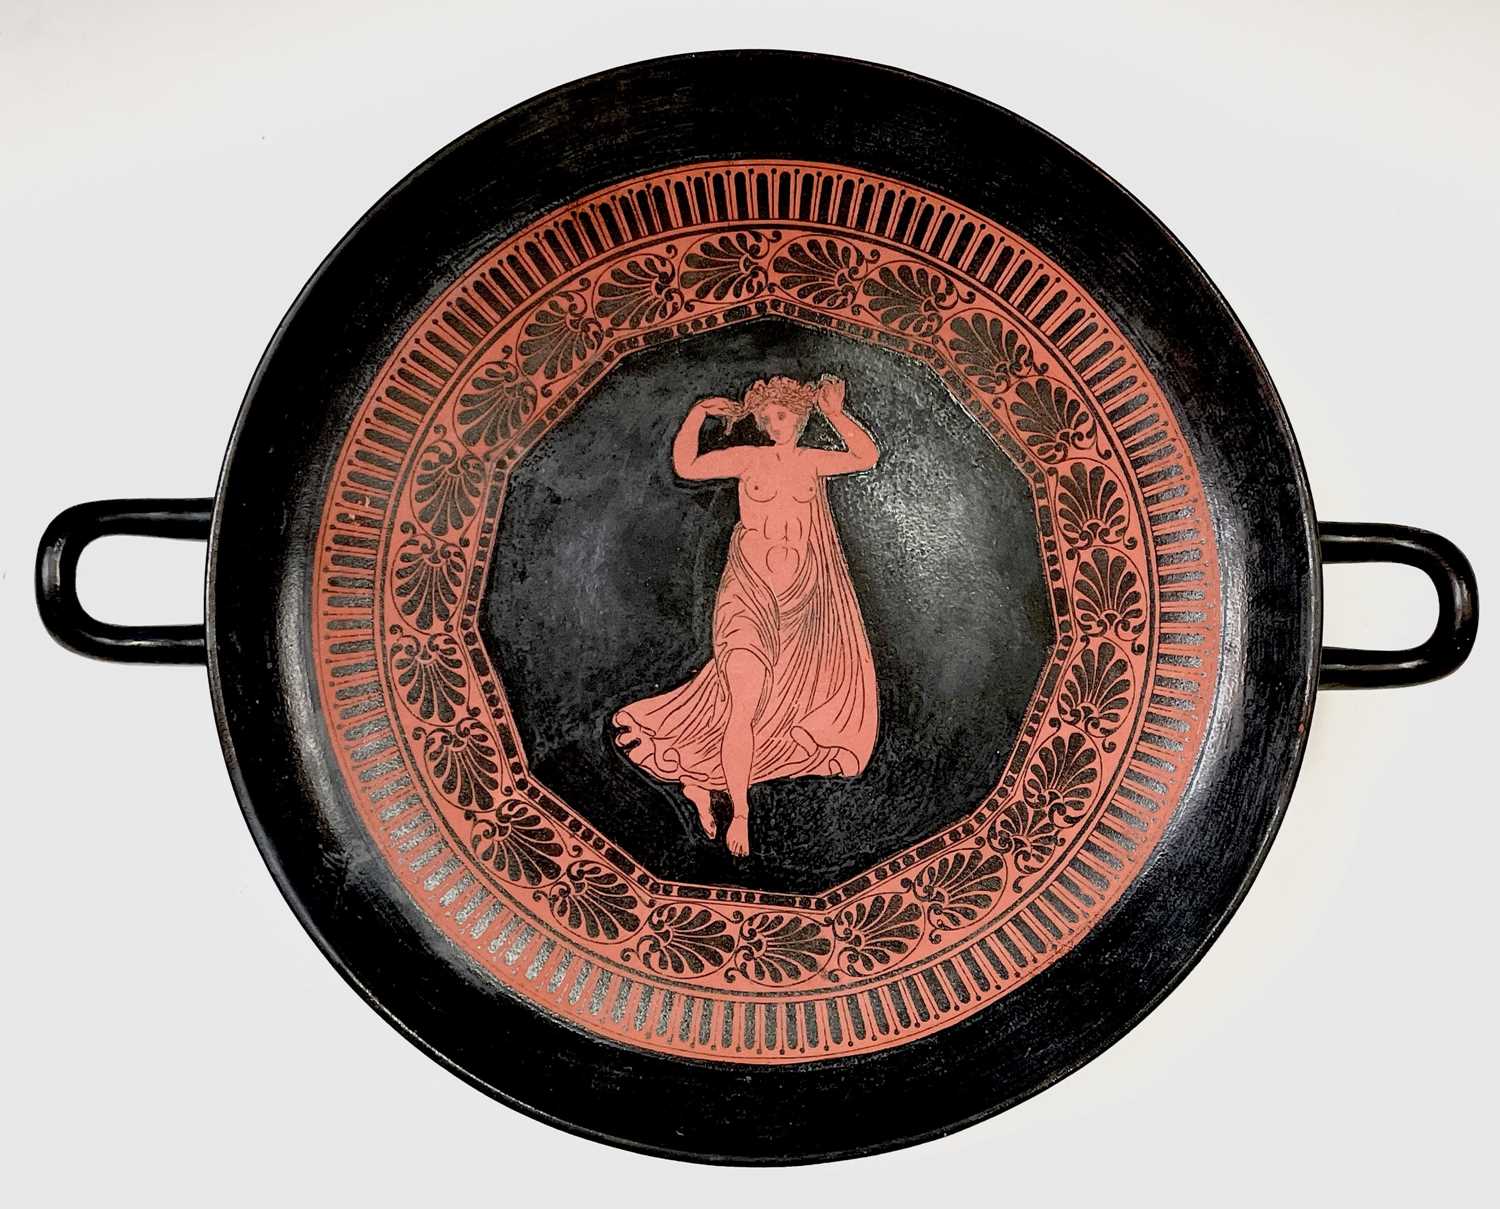 A Dillwyn's Etruscan ware twin handled tazza circa 1848-50, decorated with a partially naked dancing